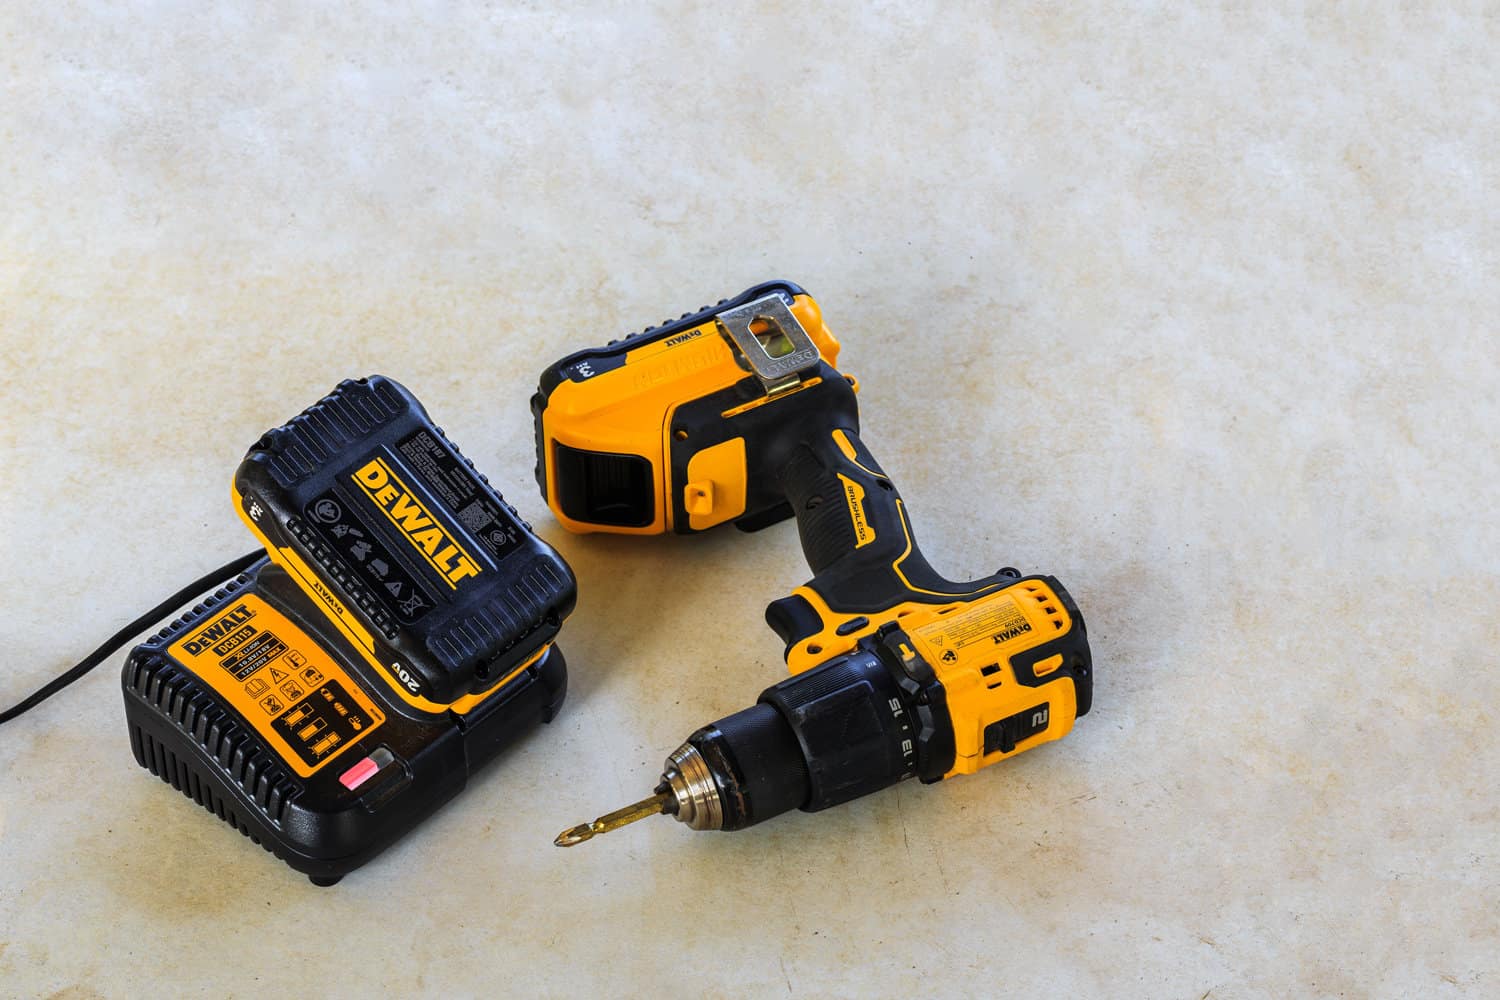 Dewalt Cordless Hammer Drill-Driver with battery charger and second battery on Cement board background